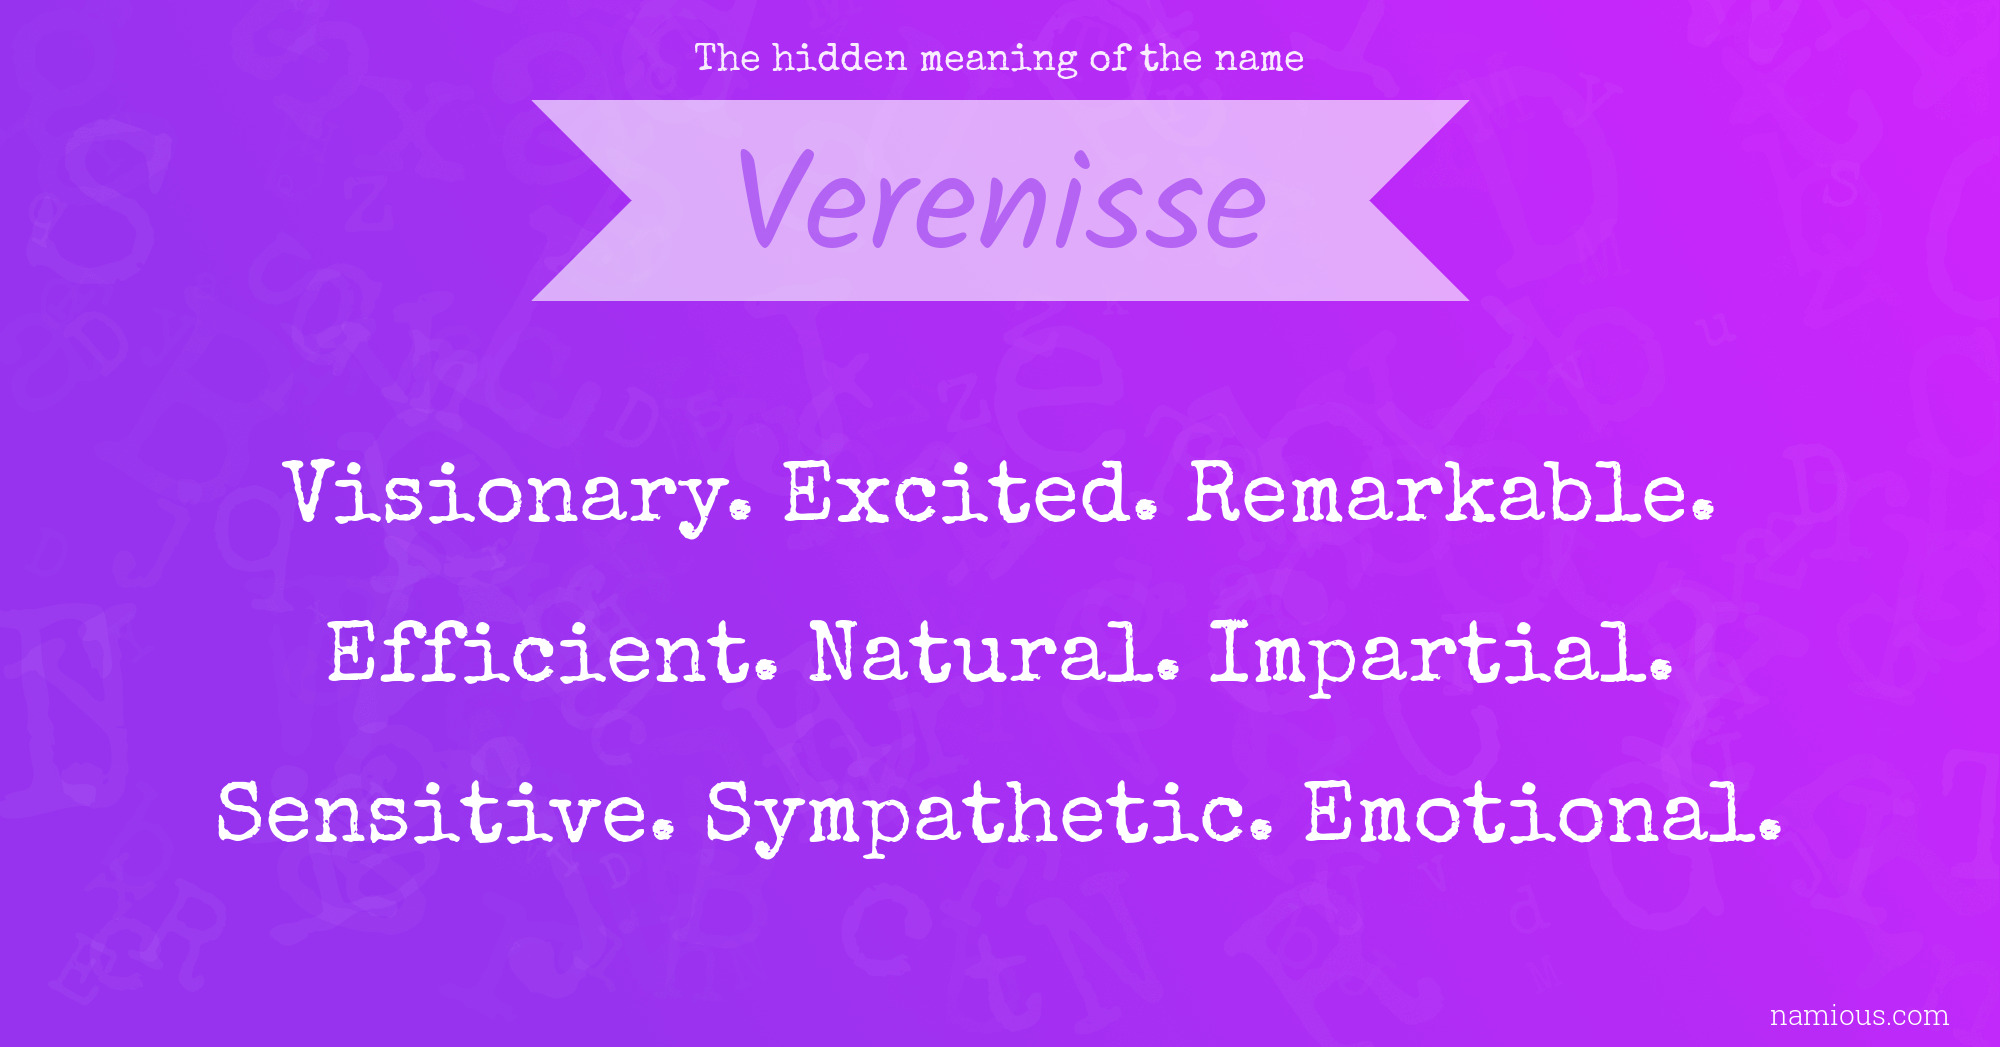 The hidden meaning of the name Verenisse